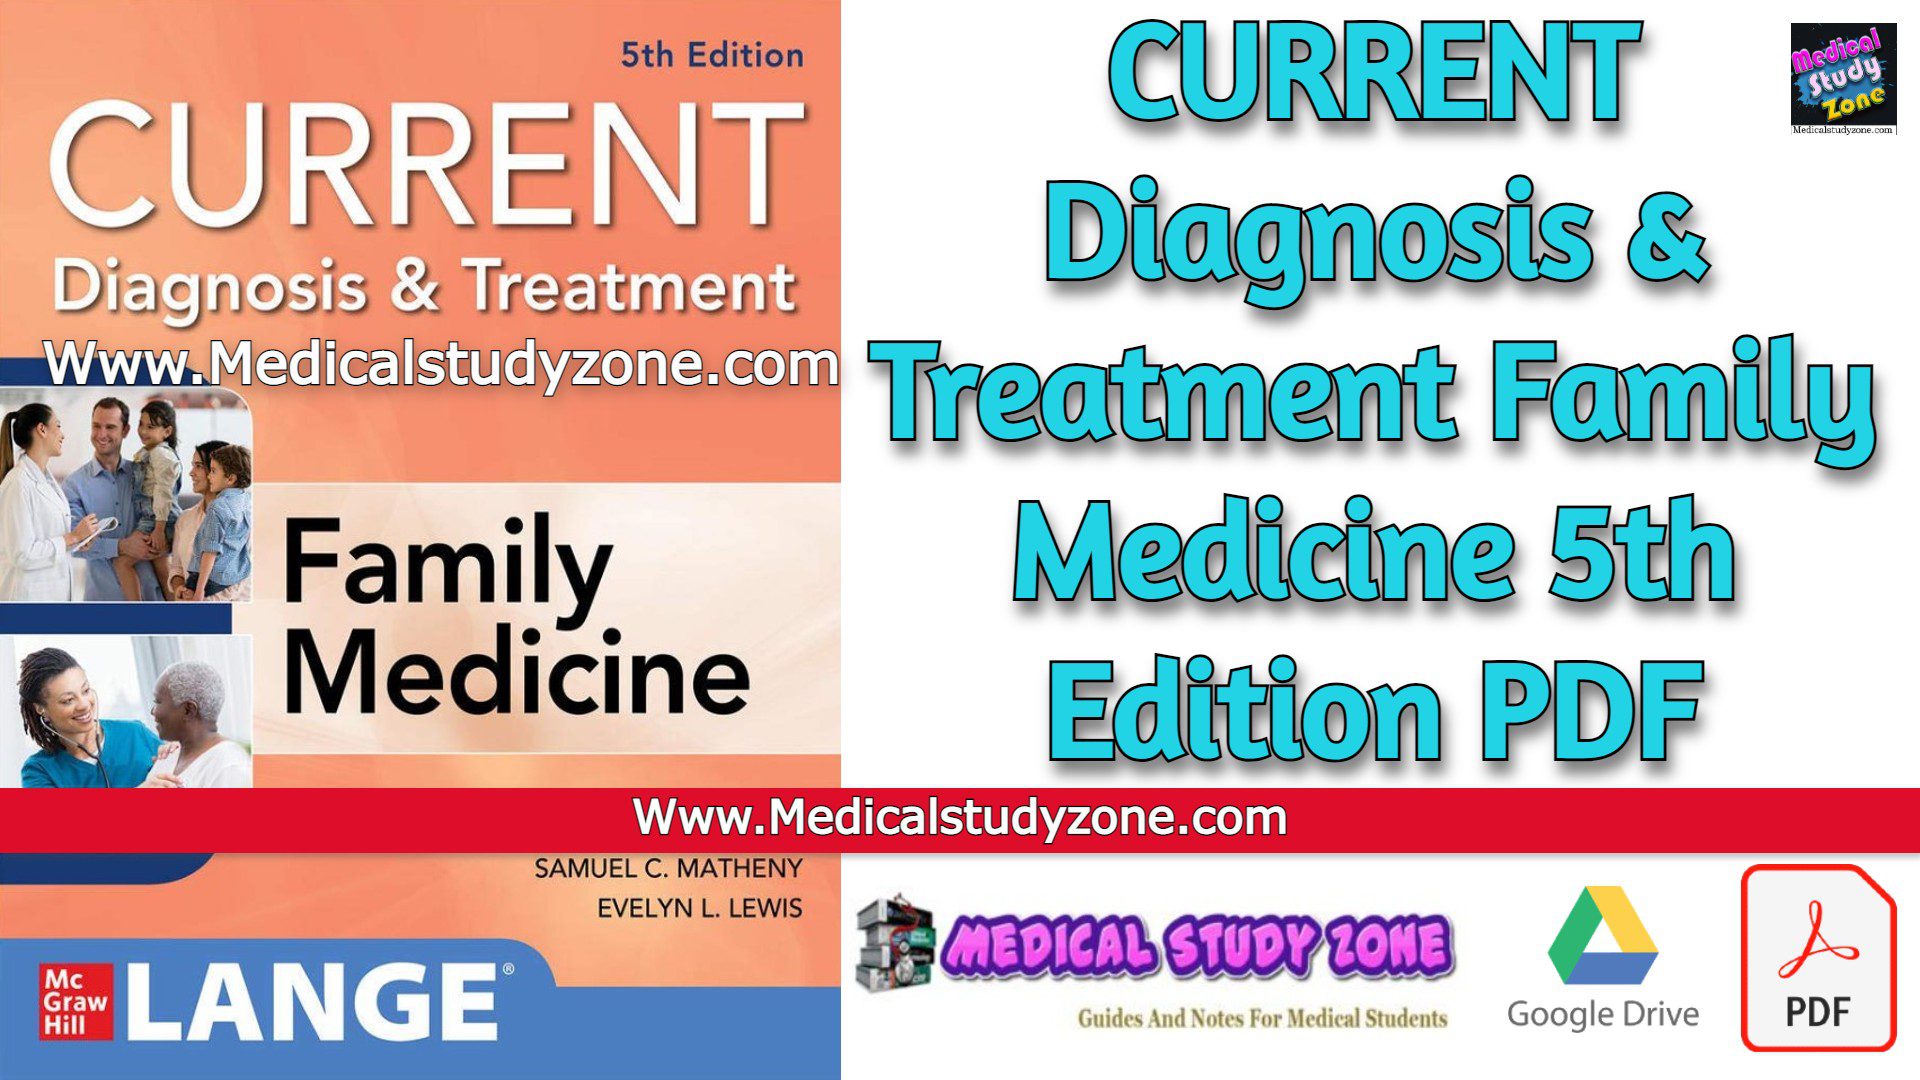 CURRENT Diagnosis & Treatment Family Medicine 5th Edition PDF Free Download